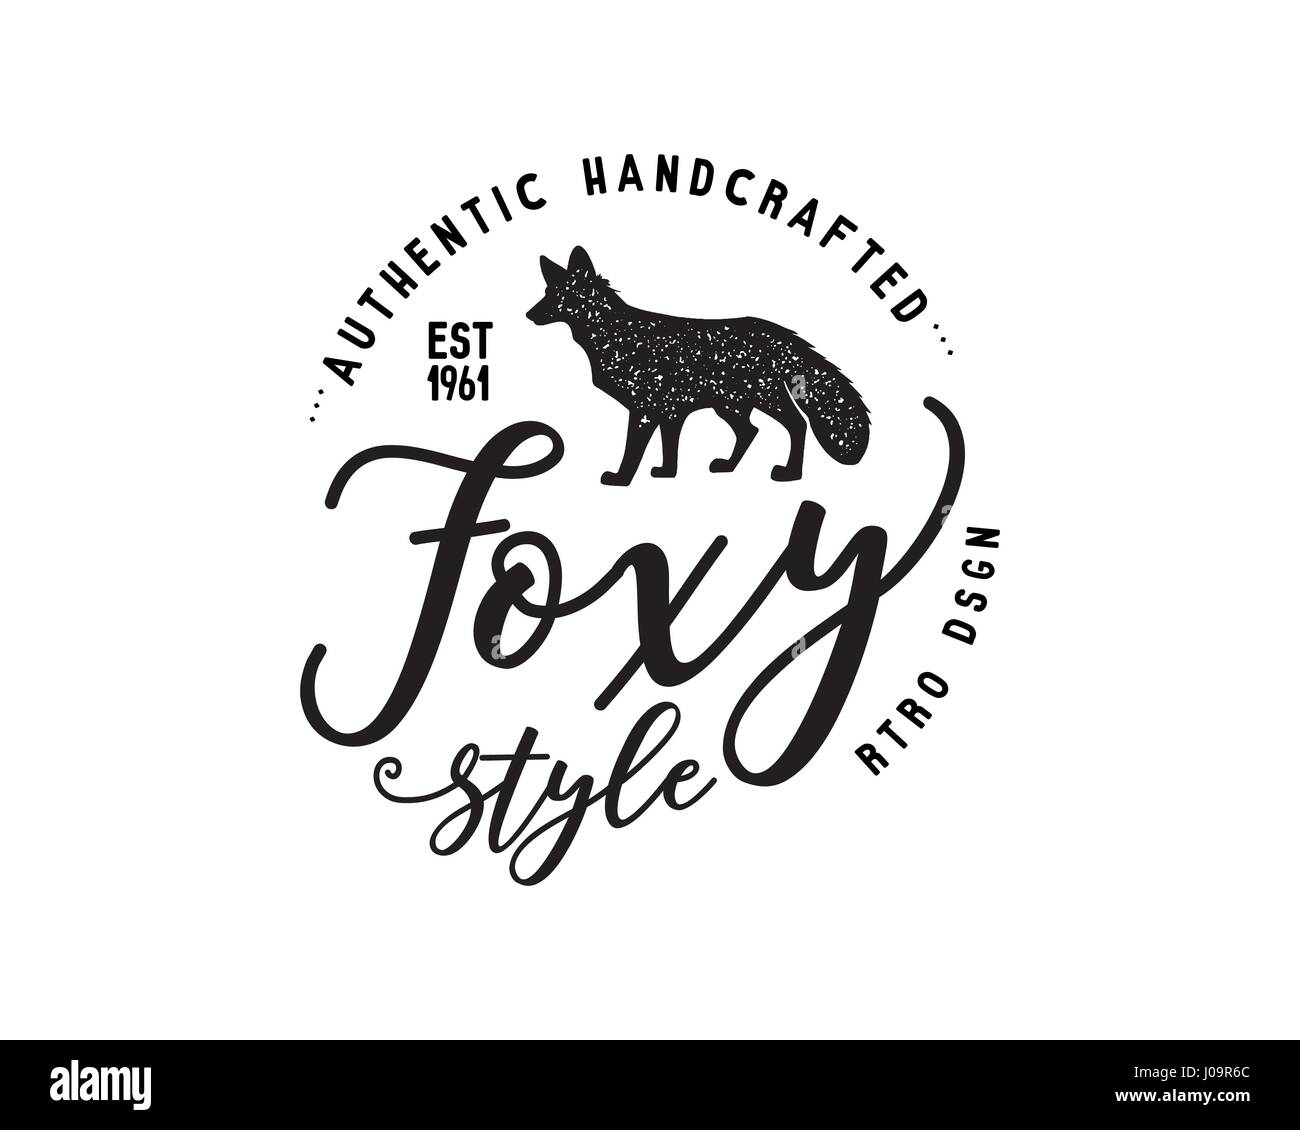 Vintage hand drawn wild animal label. Fox silhouette shape and typography elements - authentic handcrafted. Old style monochrome patch design. Rustic stamp vector t shirt template. Stock Vector